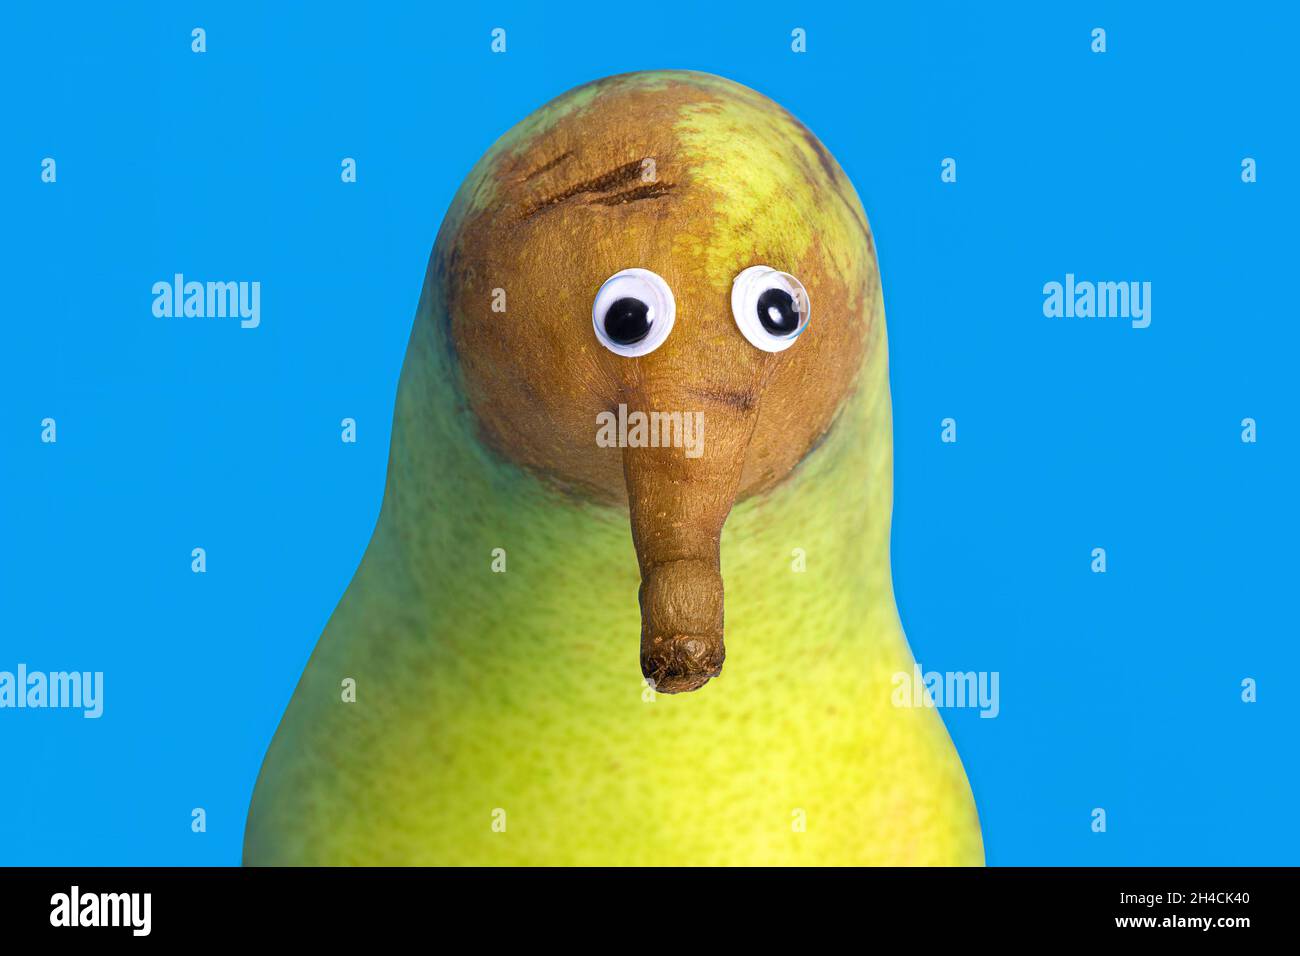 Portrait of a cute green pear with googly eyes isolated on blue background. Stock Photo